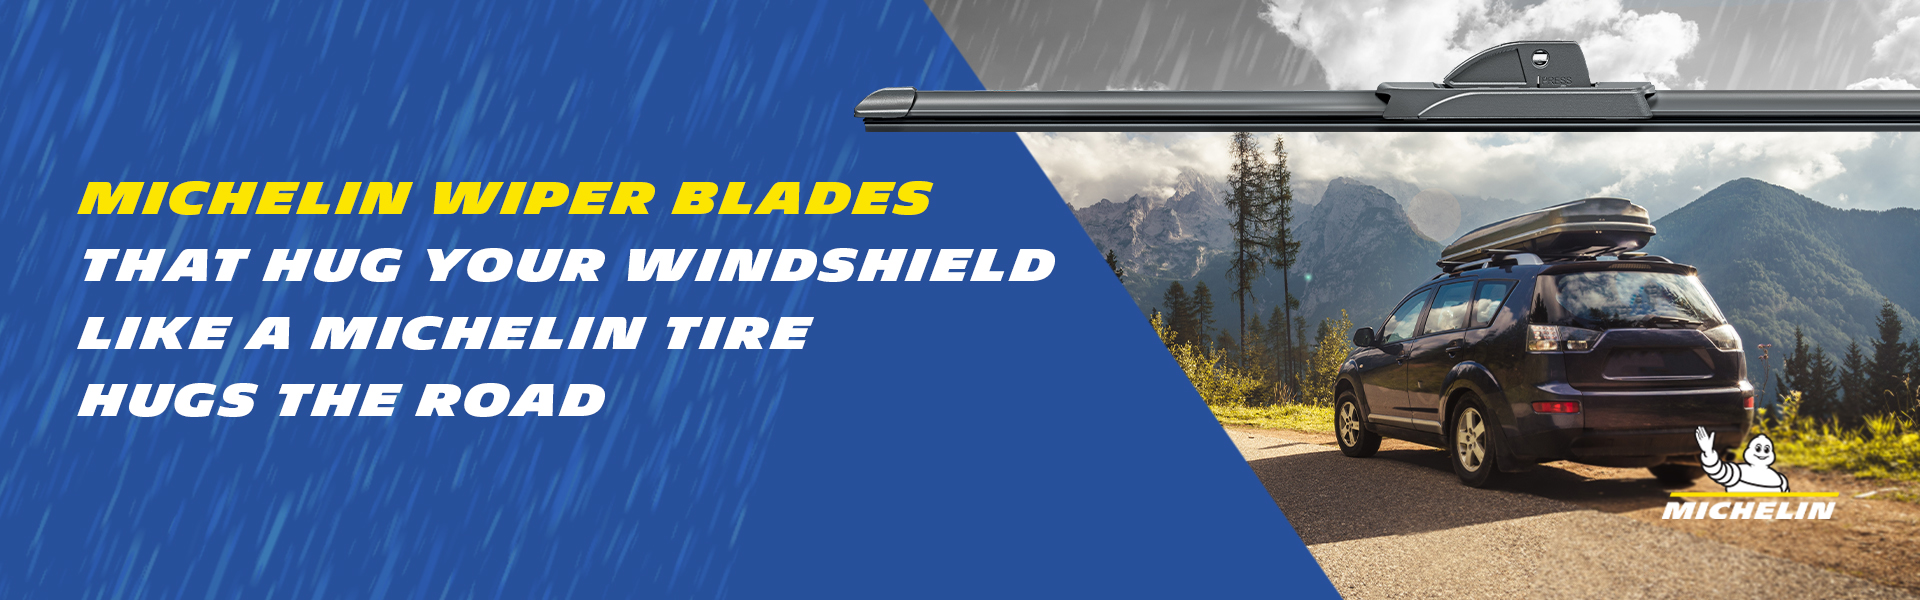 MICHELIN wiper blades that hug your windshield like a MICHELIN tyre hugs the road.